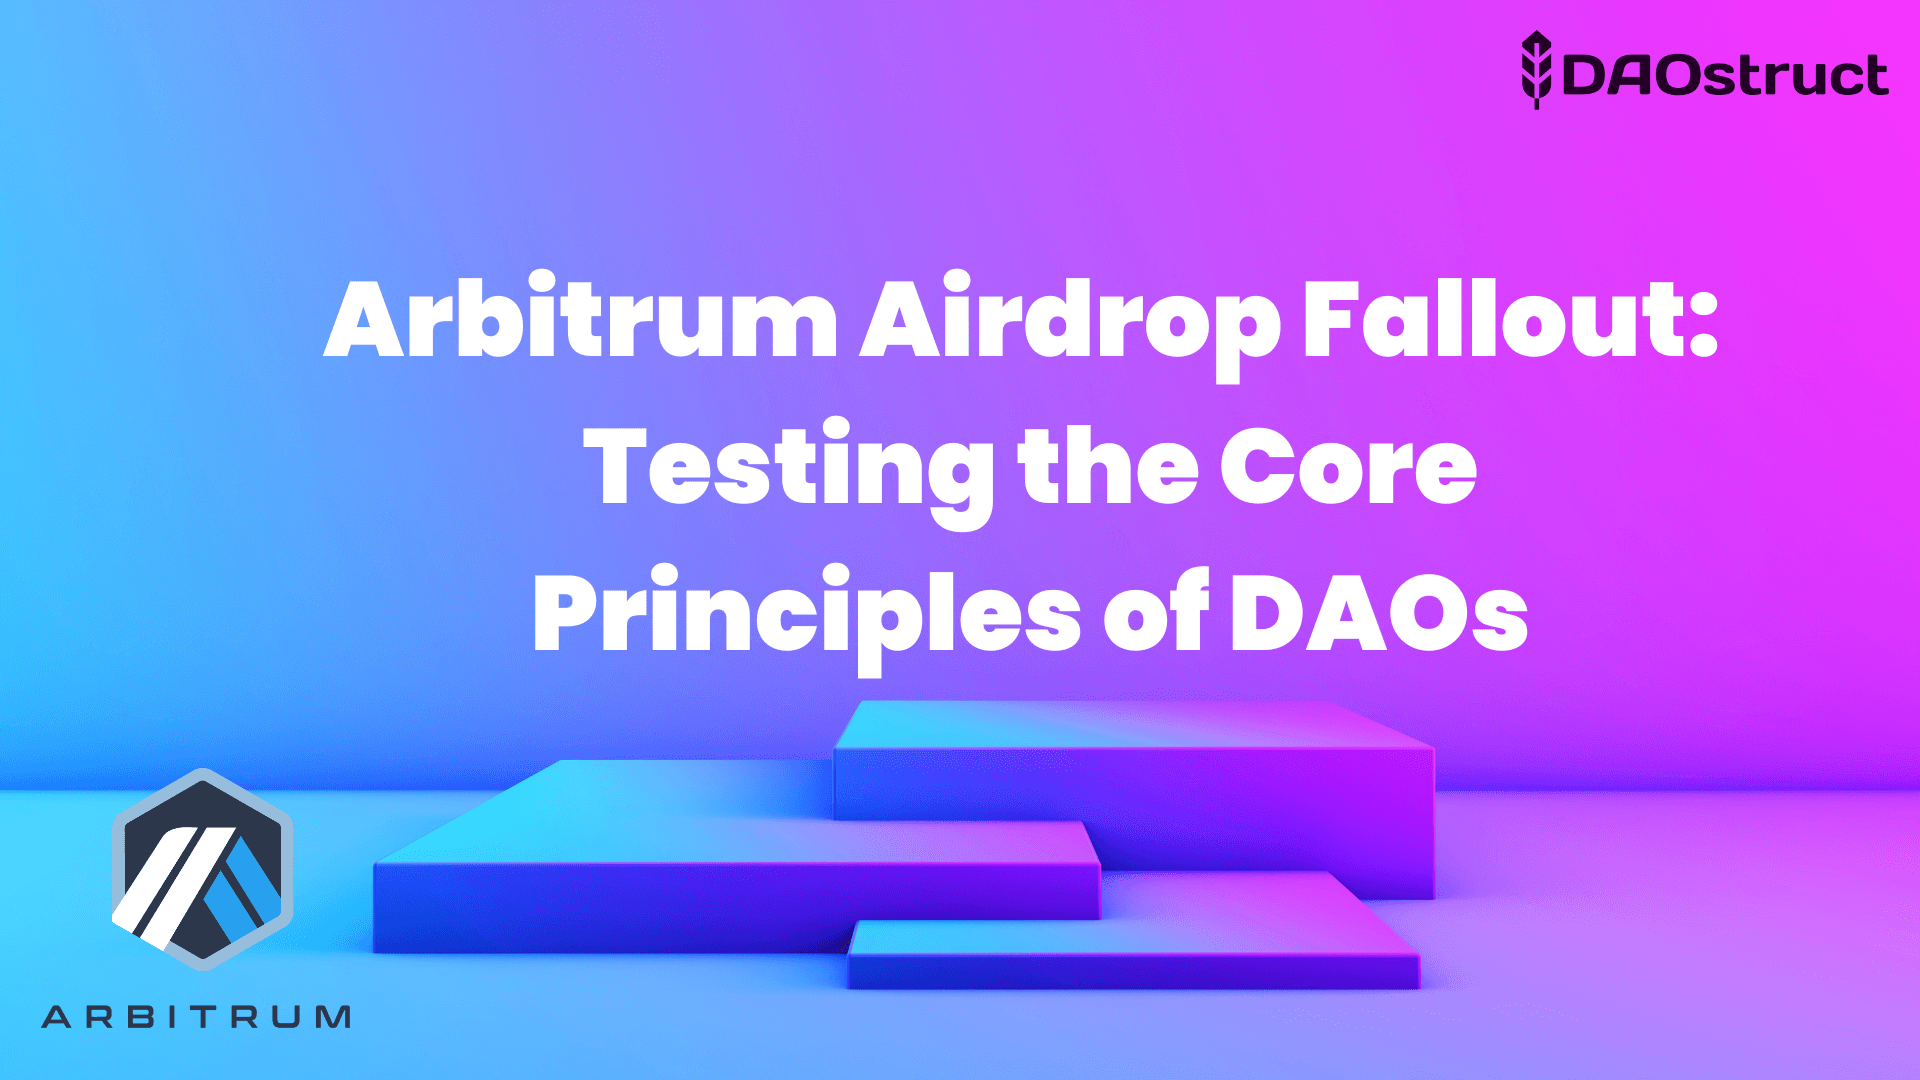 Arbitrum Airdrop Fallout: Testing the Core Principles of DAOs